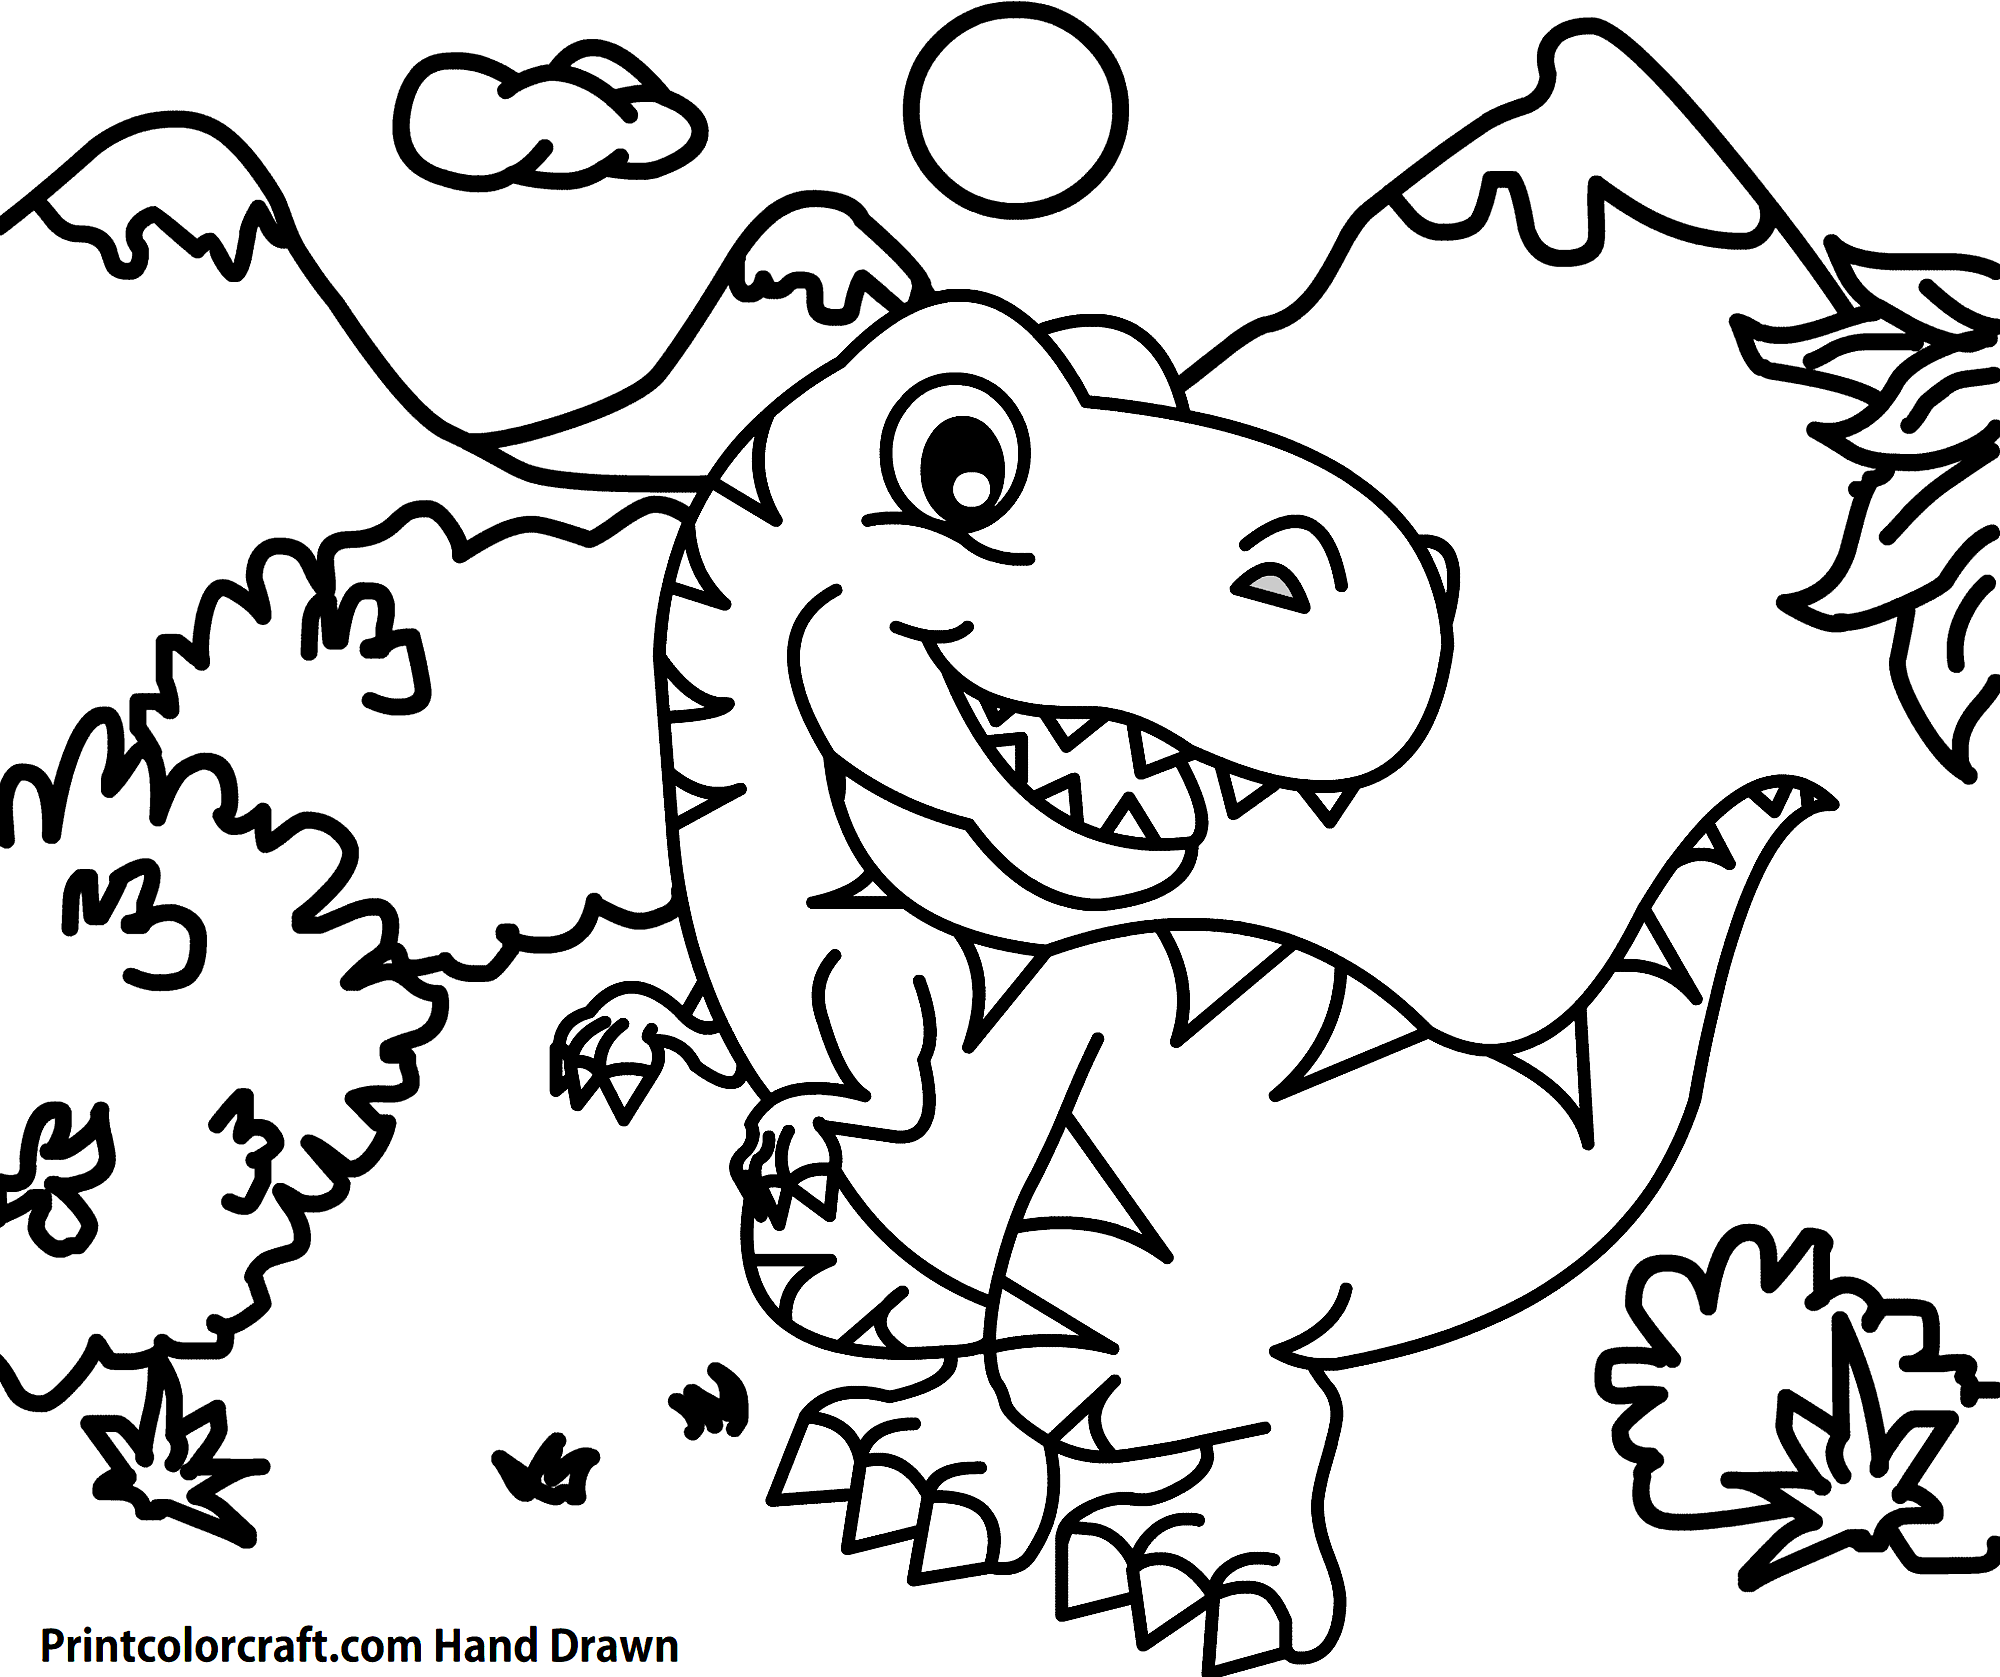 Dinosaur Coloring Pages (Updated): Printable Pdf » Print Color Craft